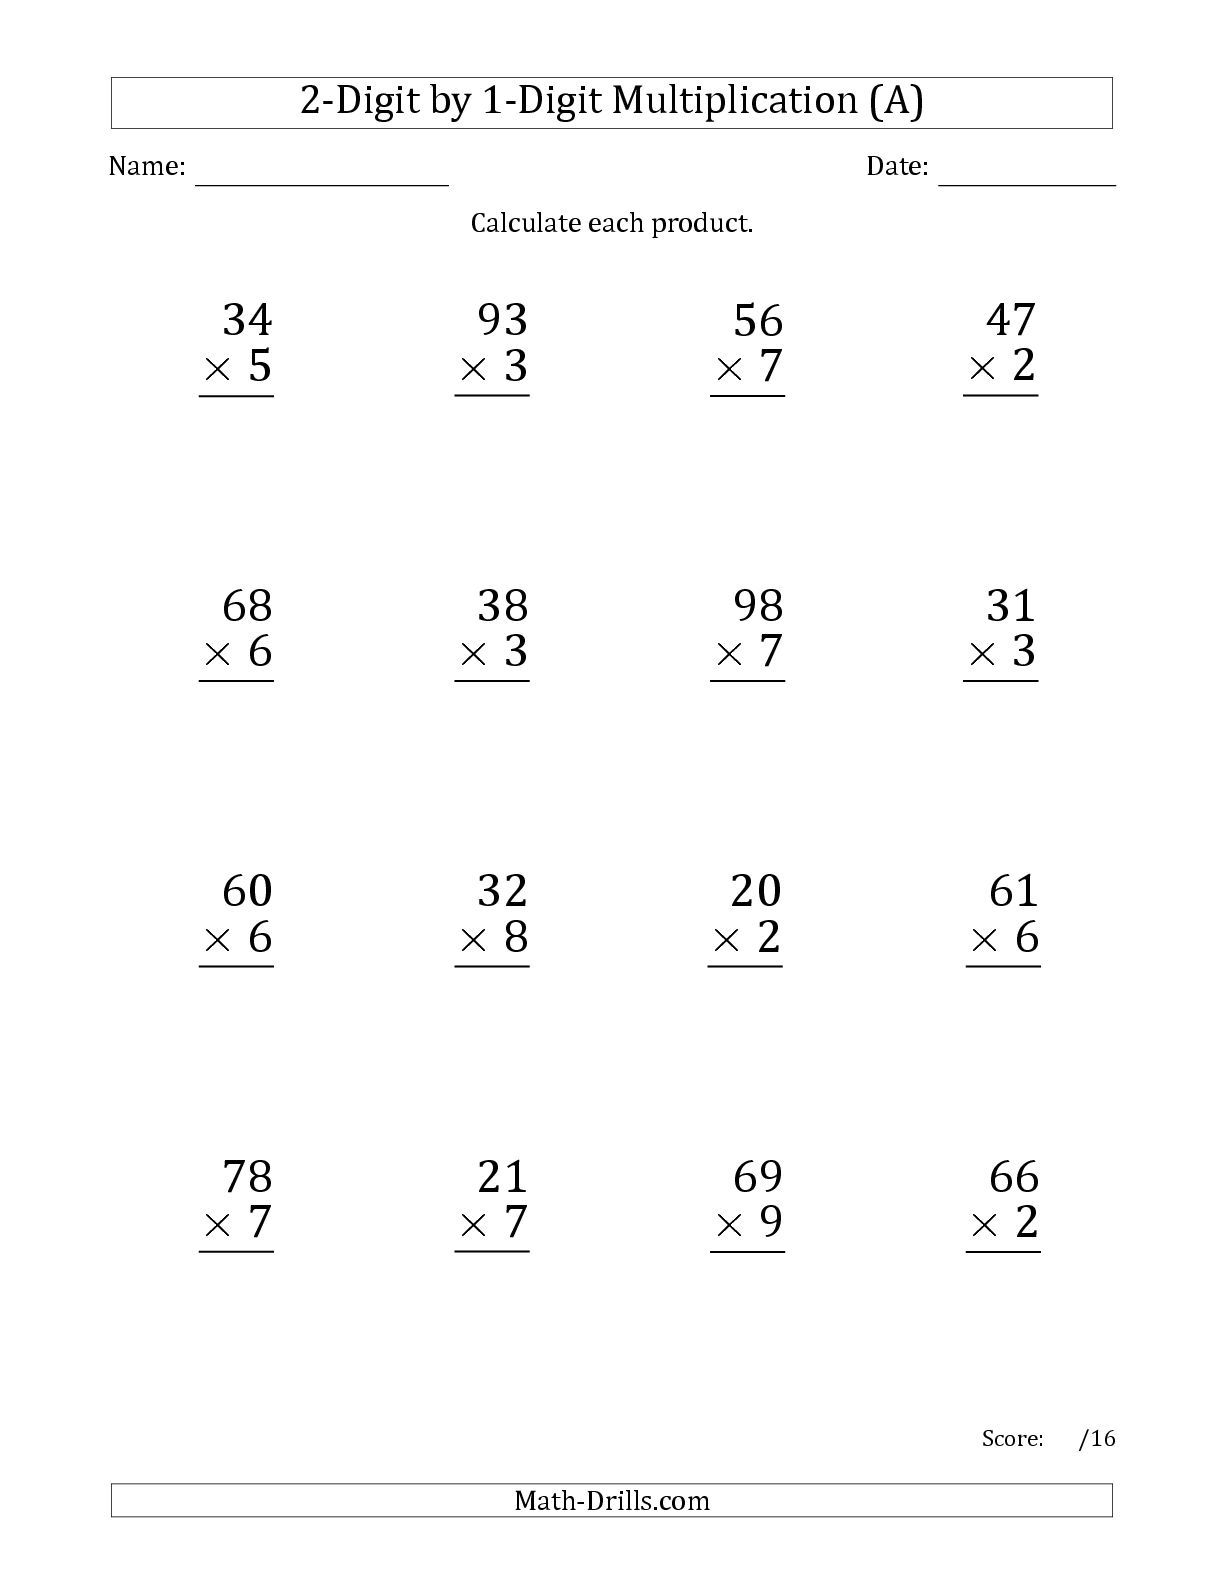 The Multiplying 2-Digit1-Digit Numbers (Large Print) (A intended for Multiplication Worksheets No Regrouping